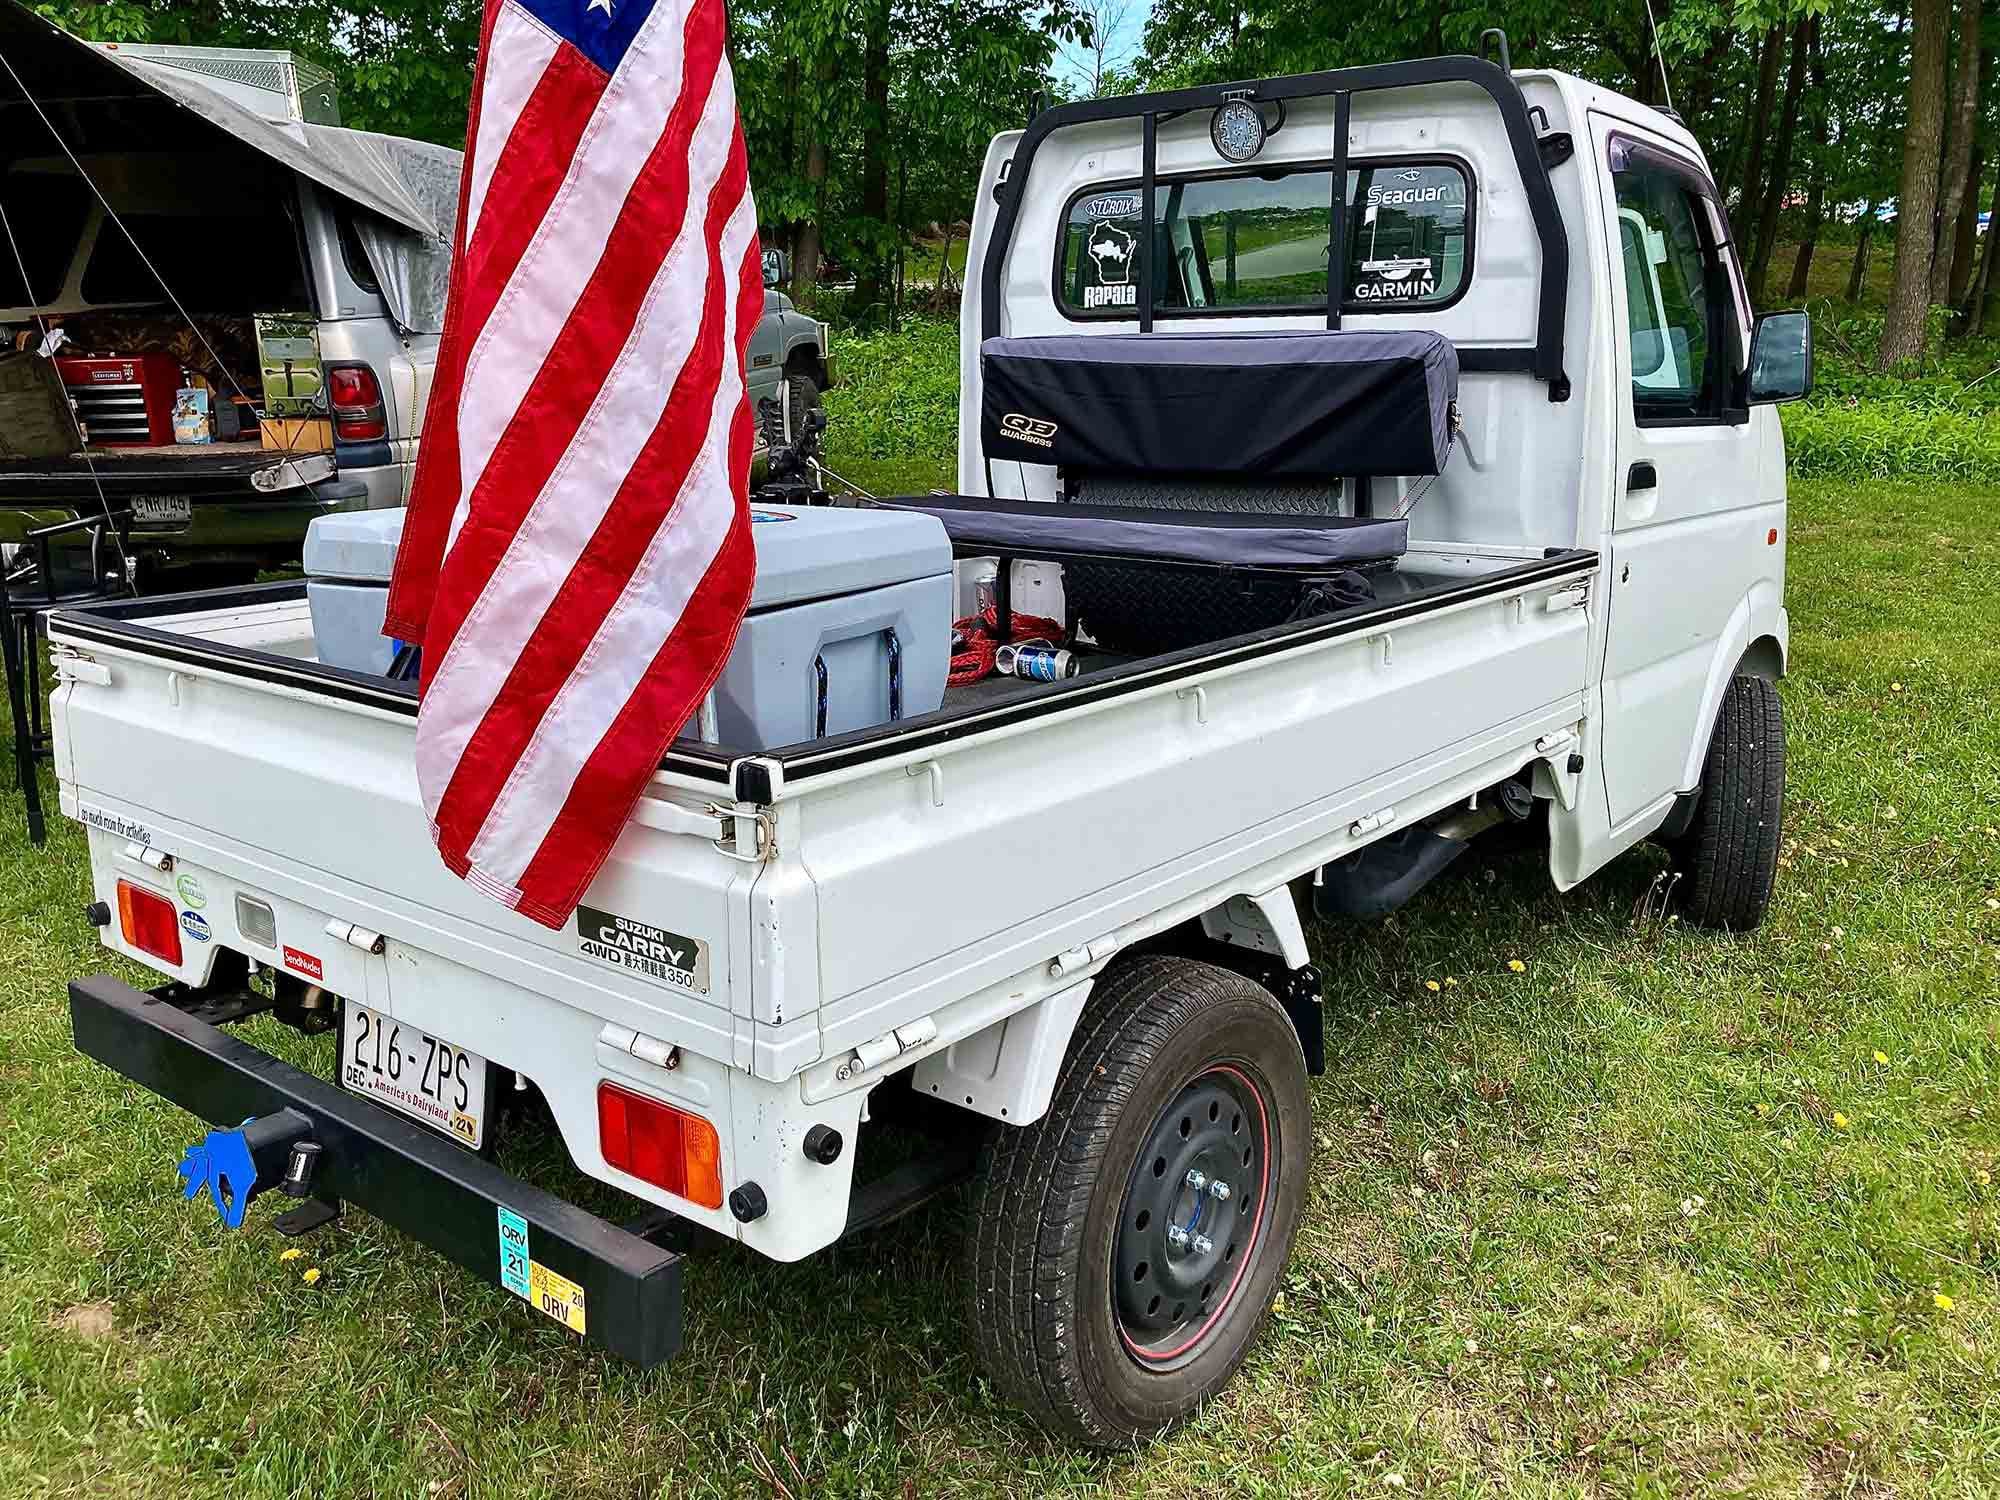 Ready for hauling beer and race fans: a JDM Suzuki Carry 4x4 Kei mini truck.